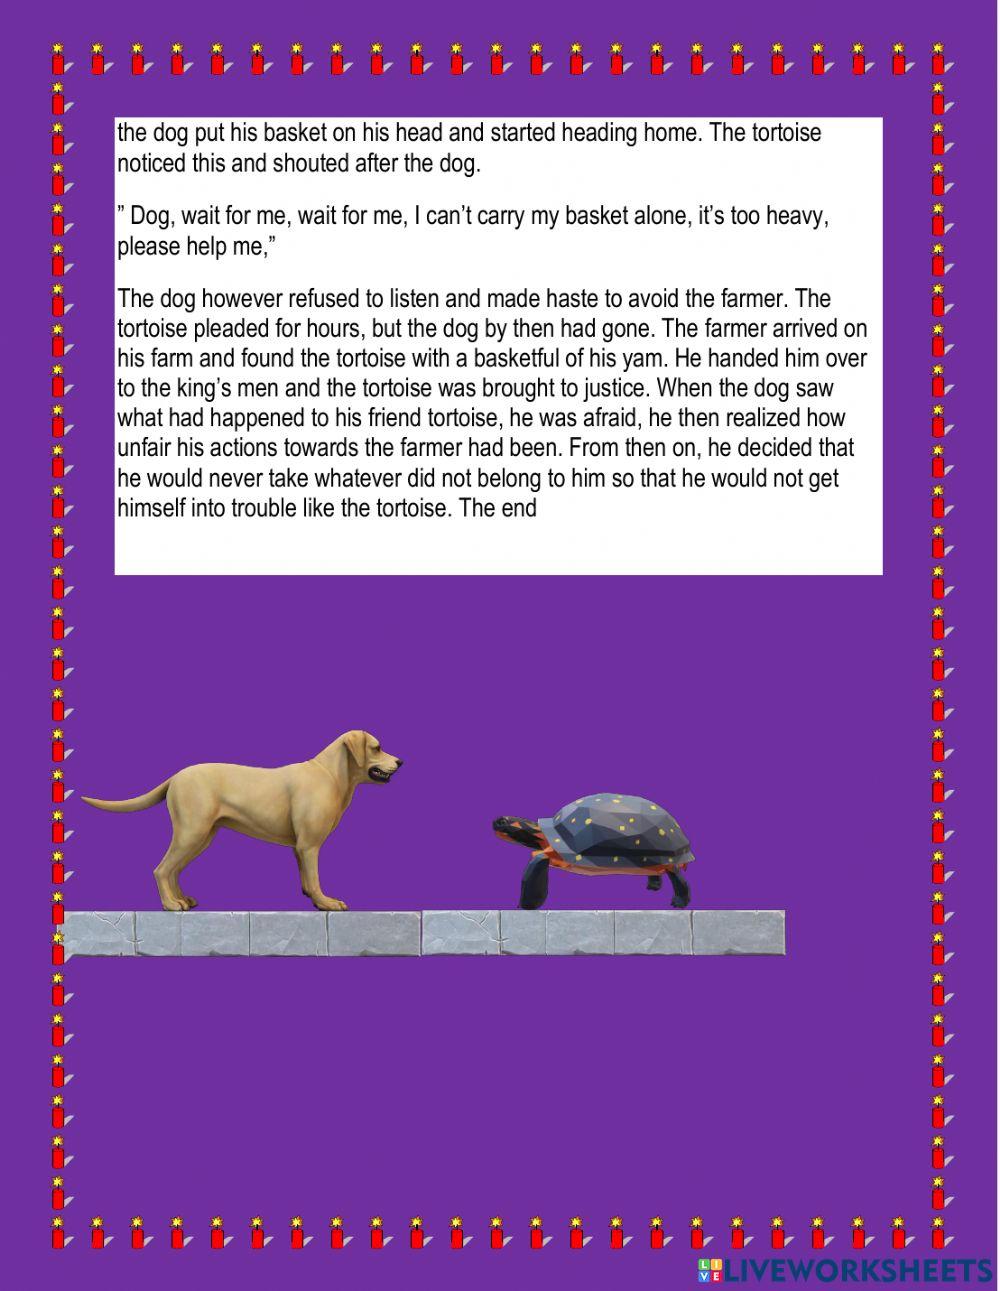 The turtle and the dog